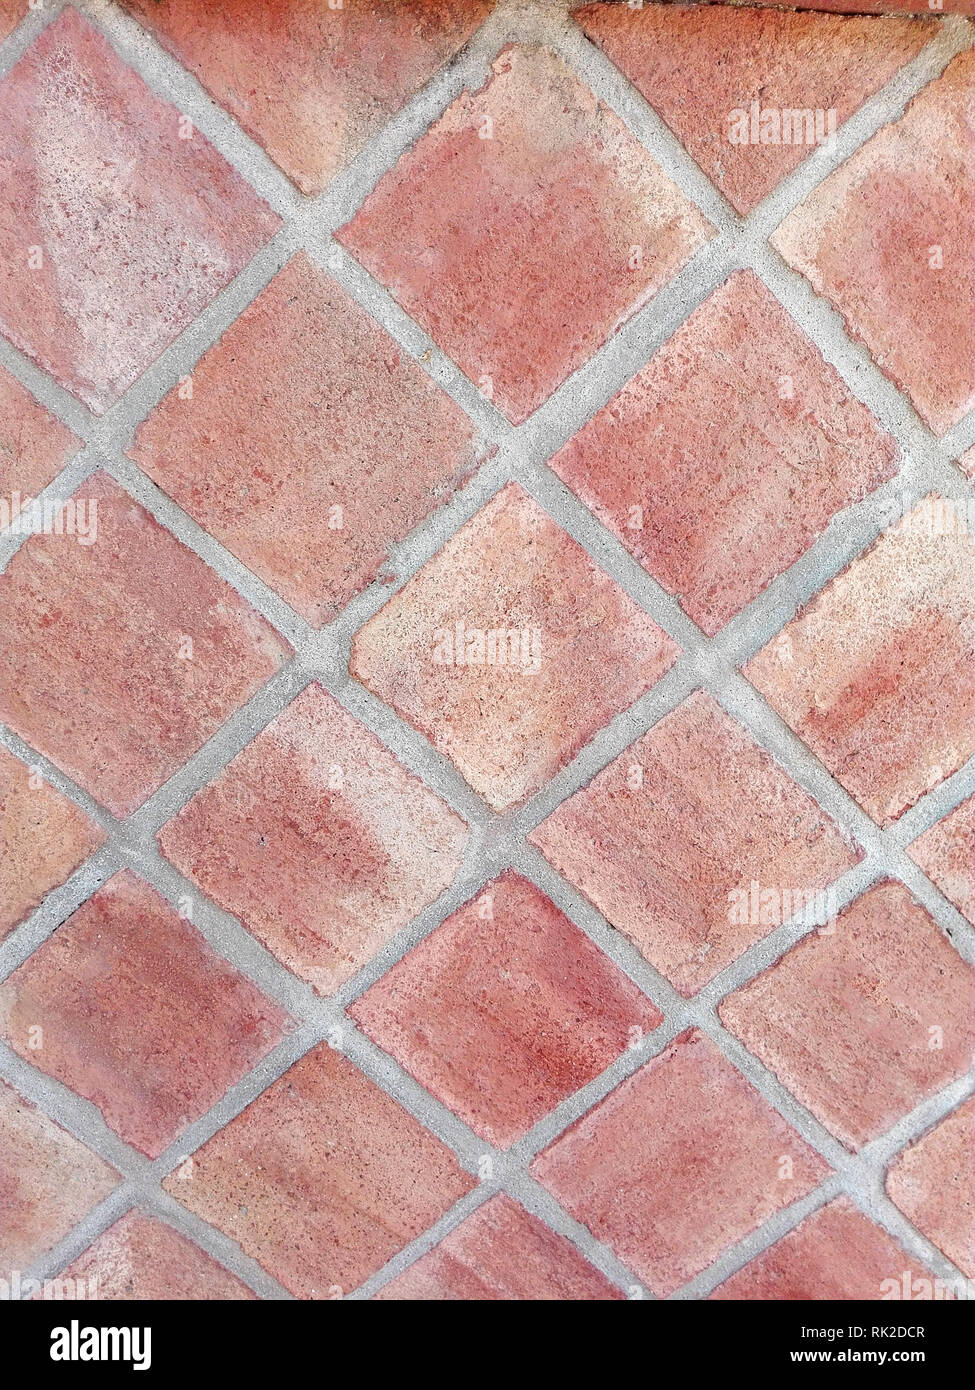 Wall of clay tiles in the shape of diamonds Stock Photo